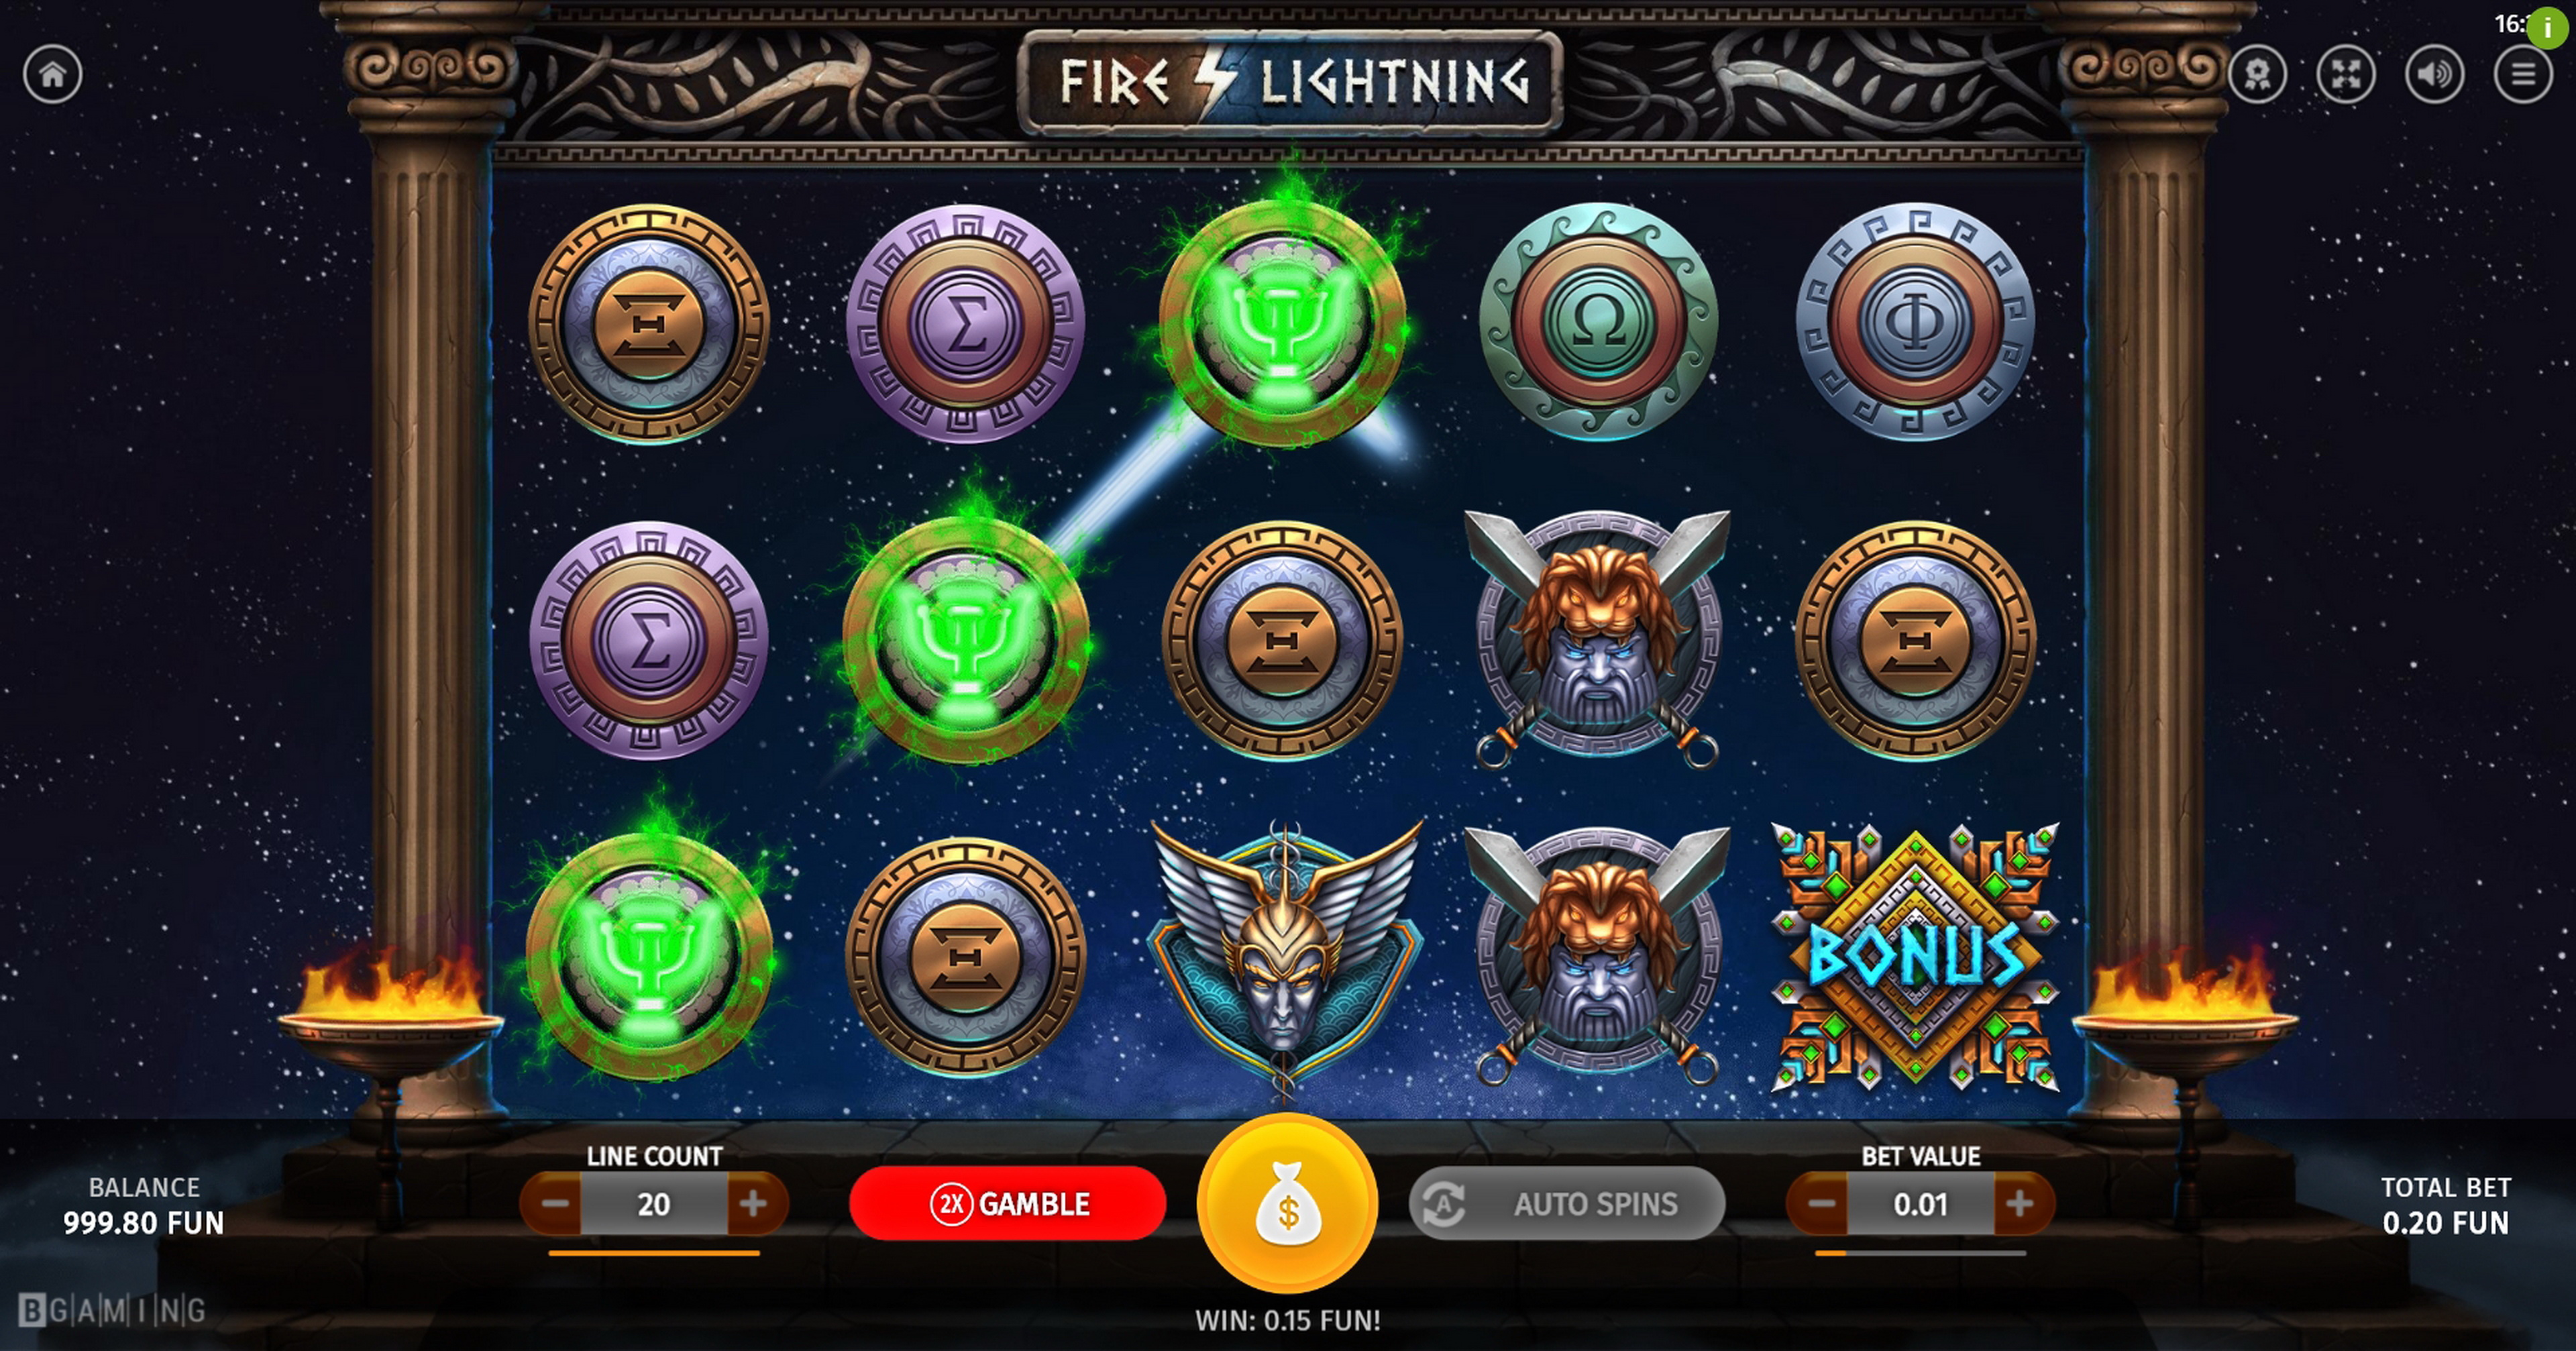 Win Money in Fire Lightning Free Slot Game by BGAMING